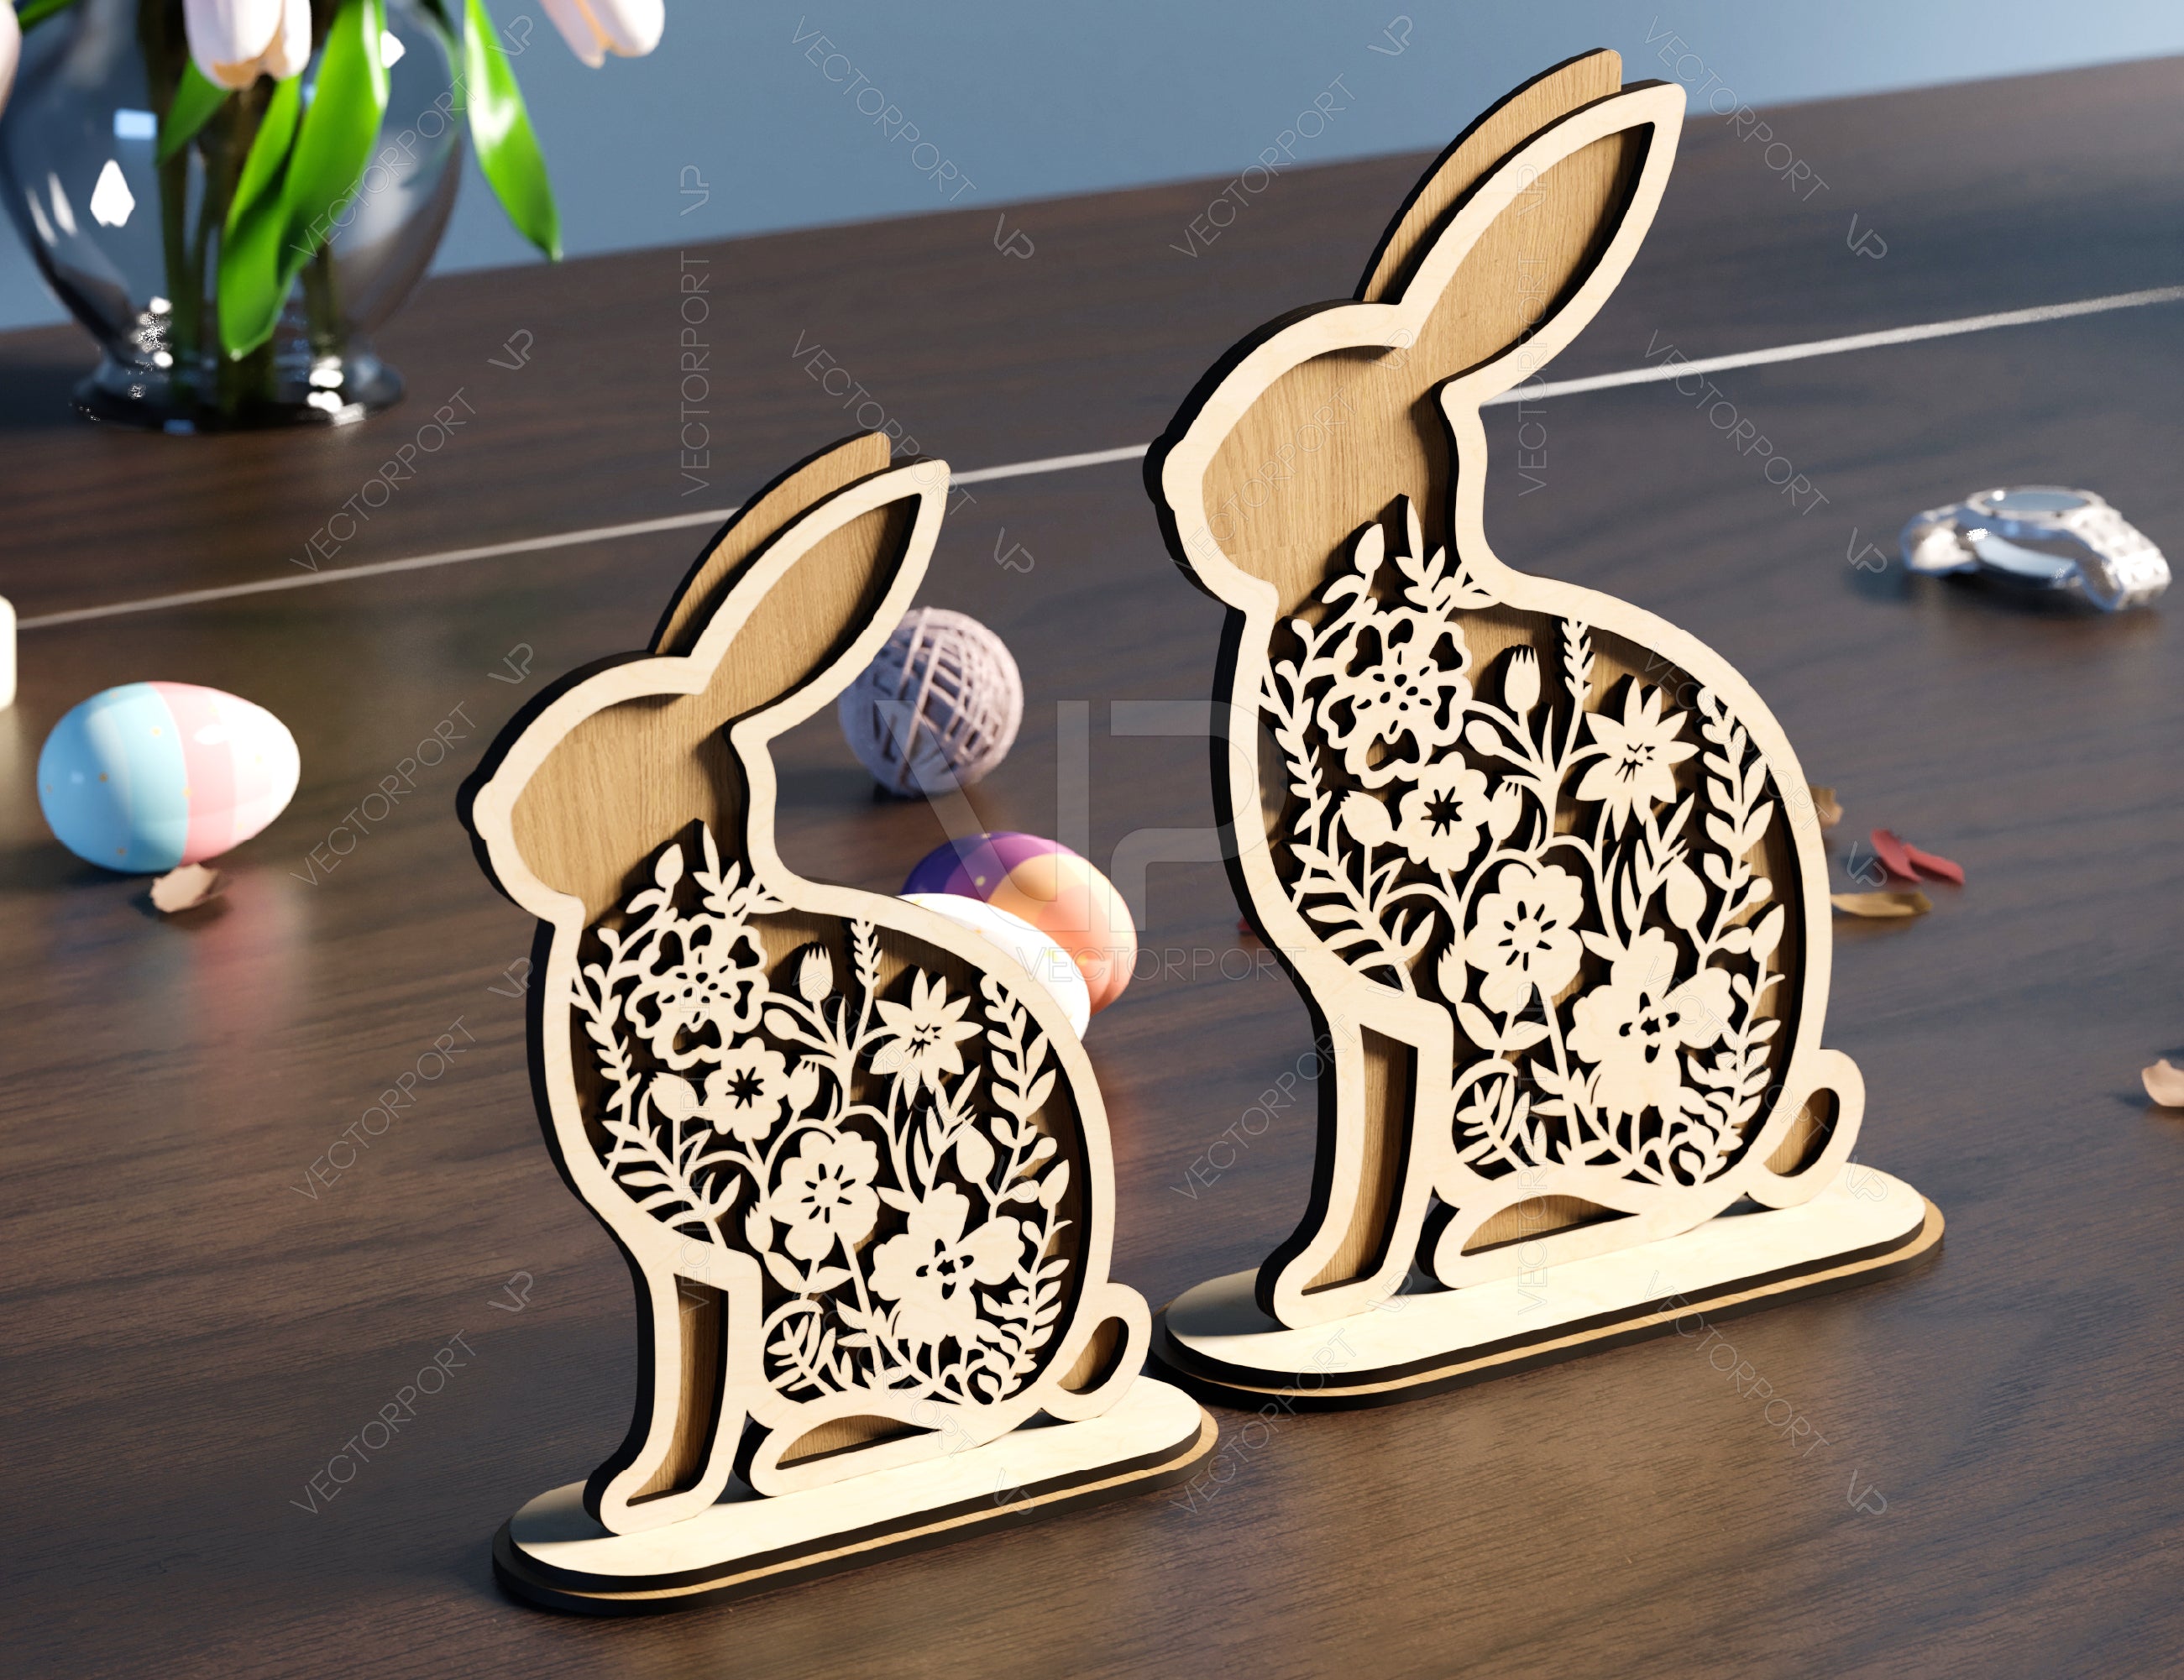 Adorable Standing Easter Bunny Spring Blooms & Bunnies SVG Laser Cut Files, Bunny Floral Ornaments, Rabbit Silhouette Digital Download |#U395|